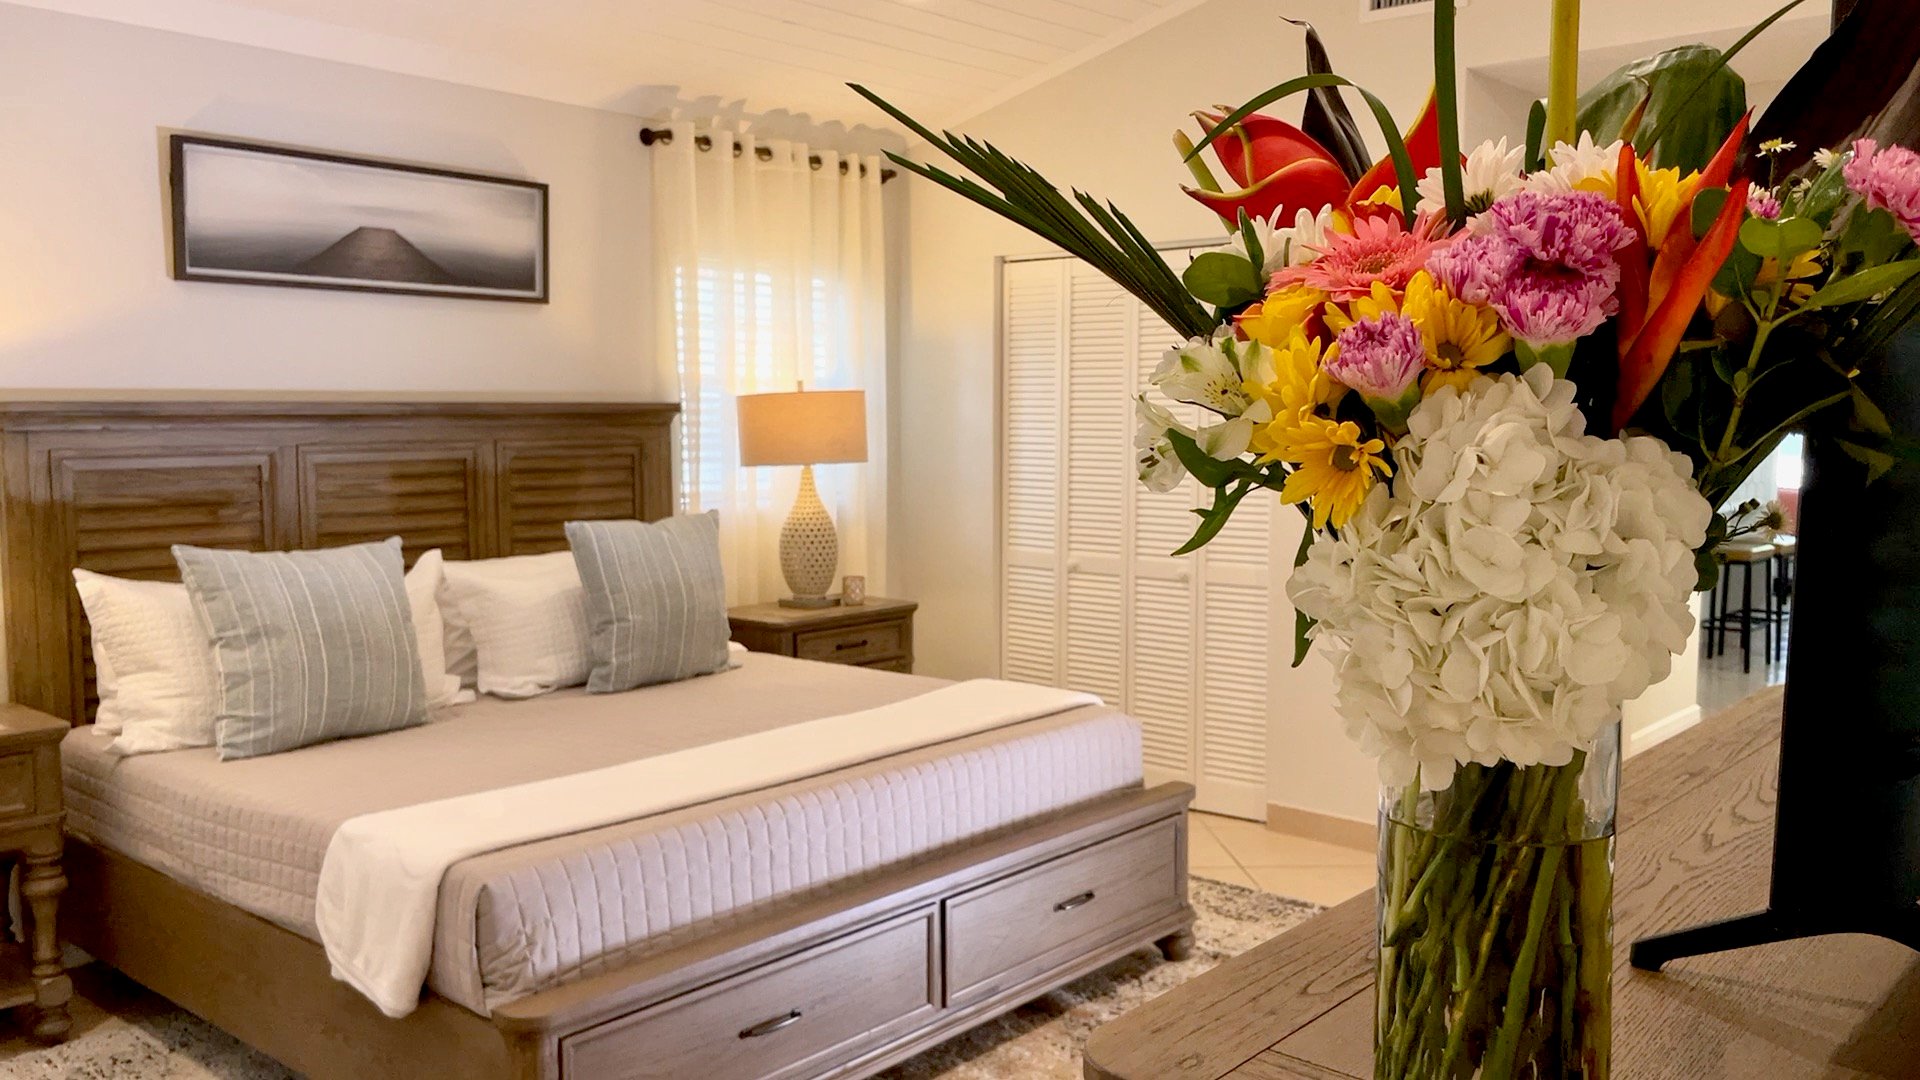 The master bedroom is also host to two gorgeous floral vases, and a large closet perfect for storing clothes and luggage alike during your stay.